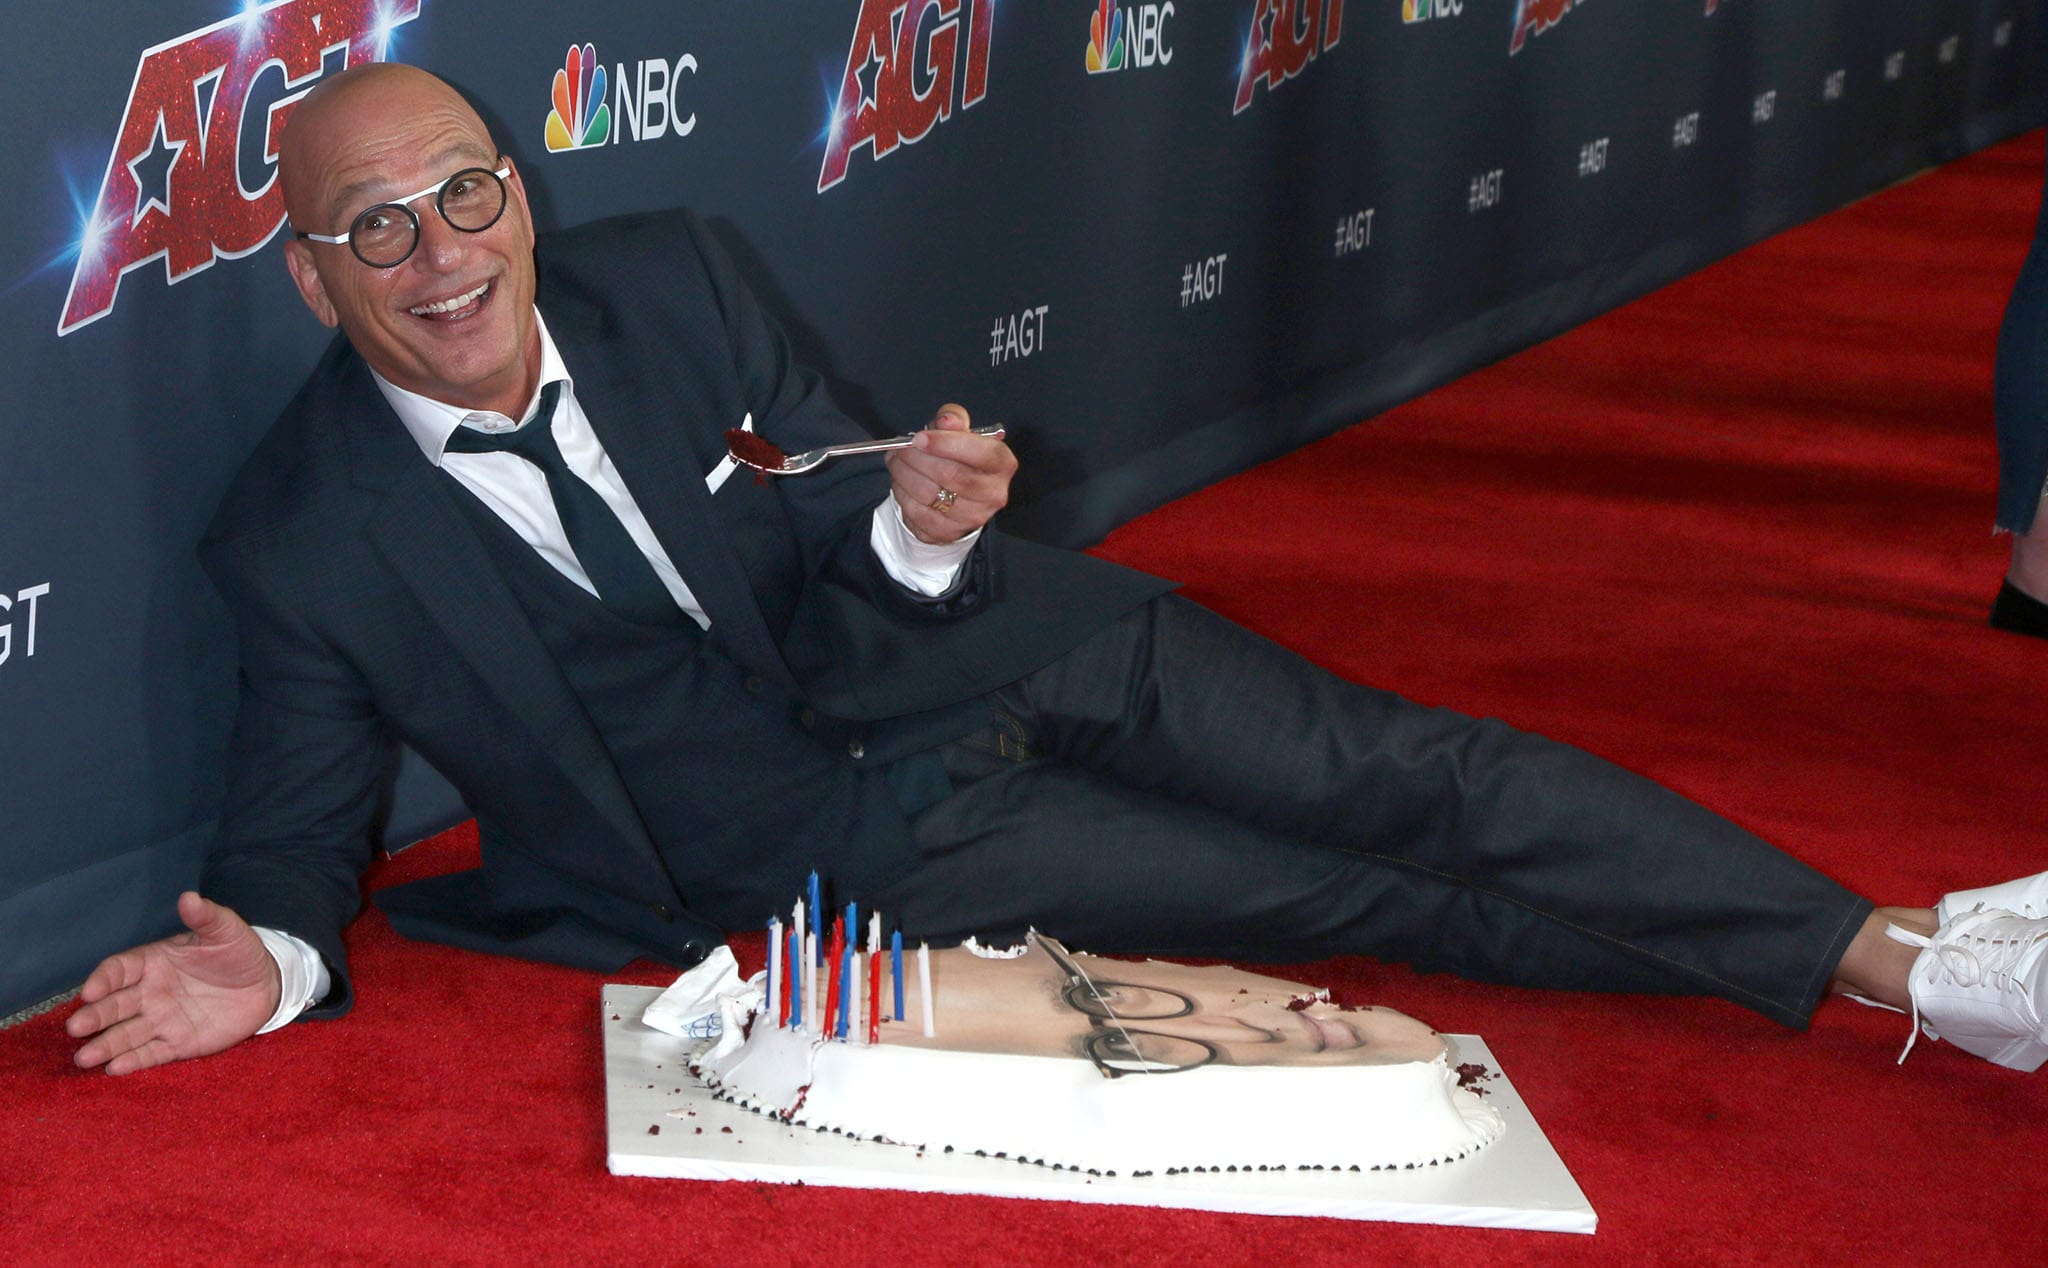 Howie Mandel suffers from anxiety and OCD since childhood